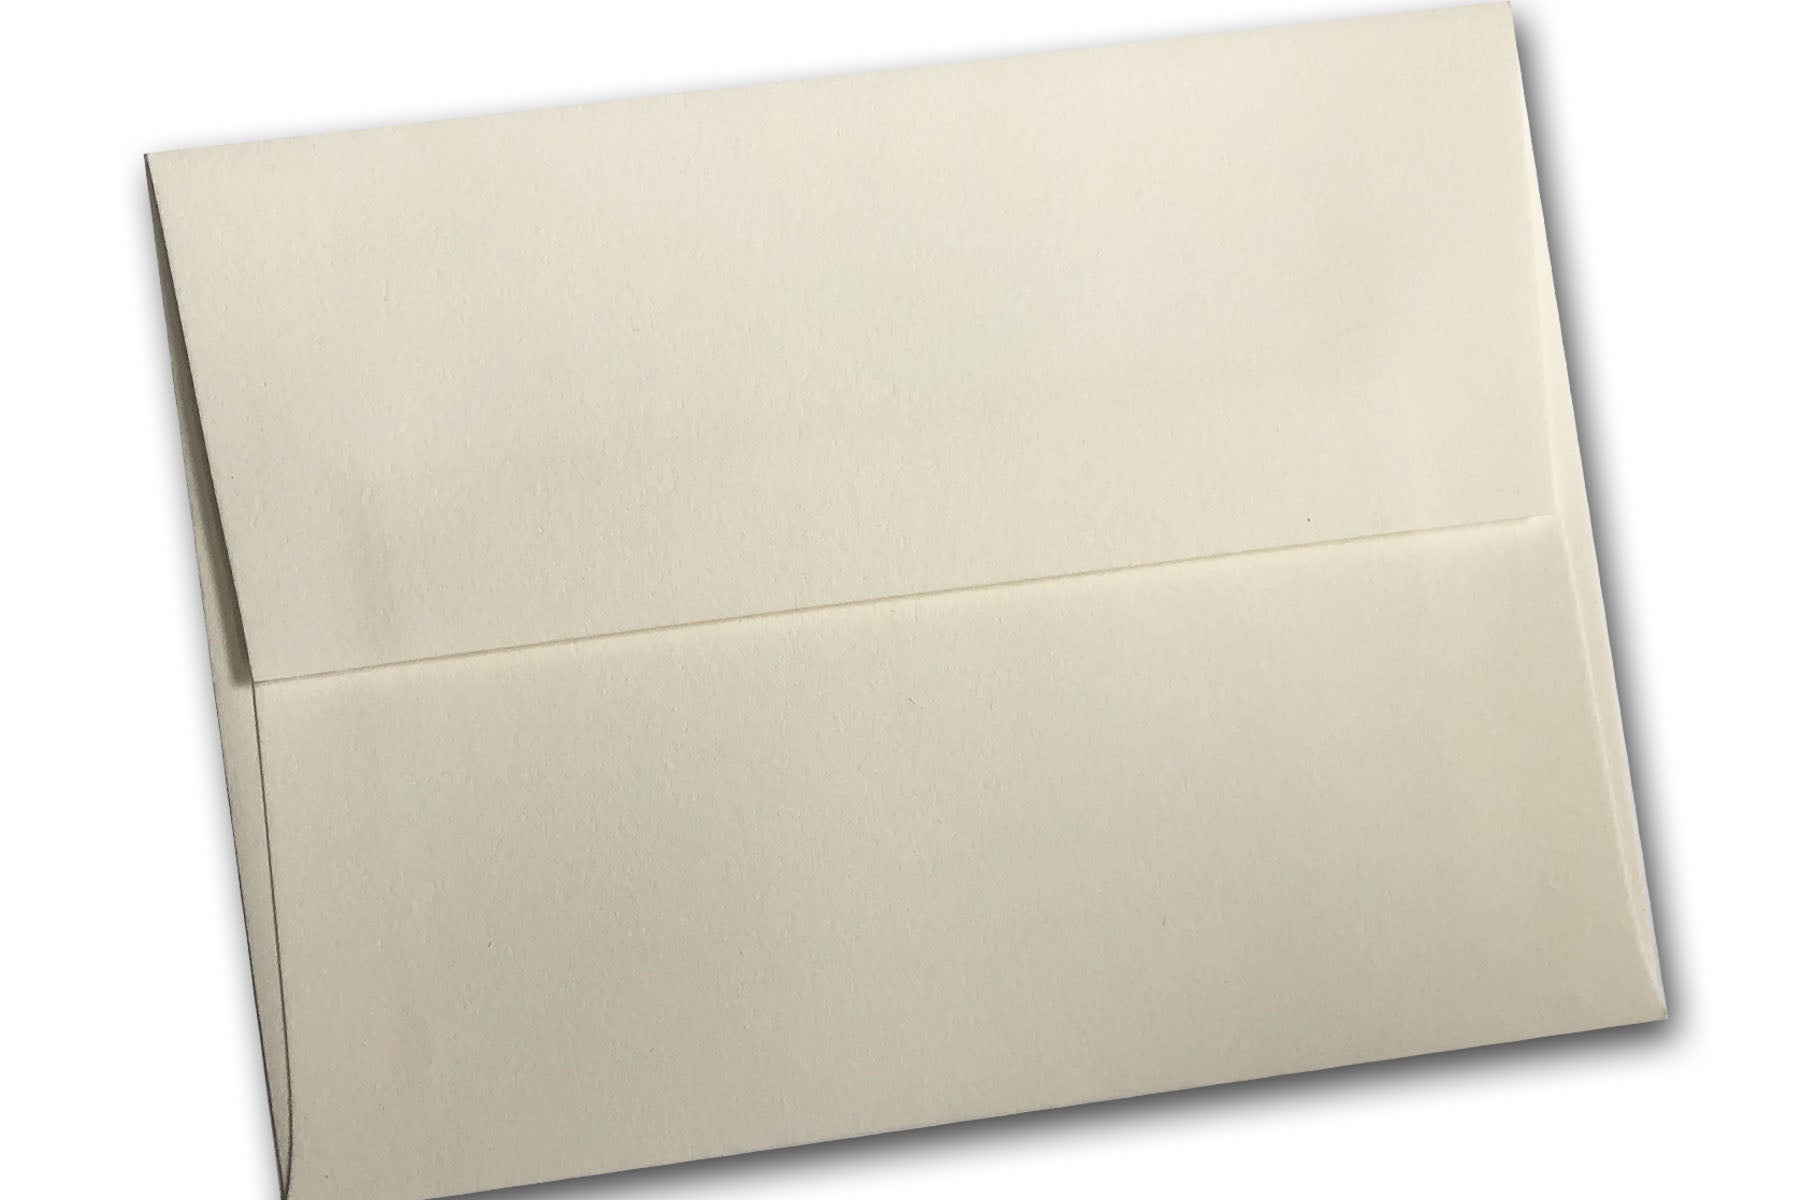 100 Pack A4 Envelopes, Assorted Colors Invite Envelope, 4.25 x